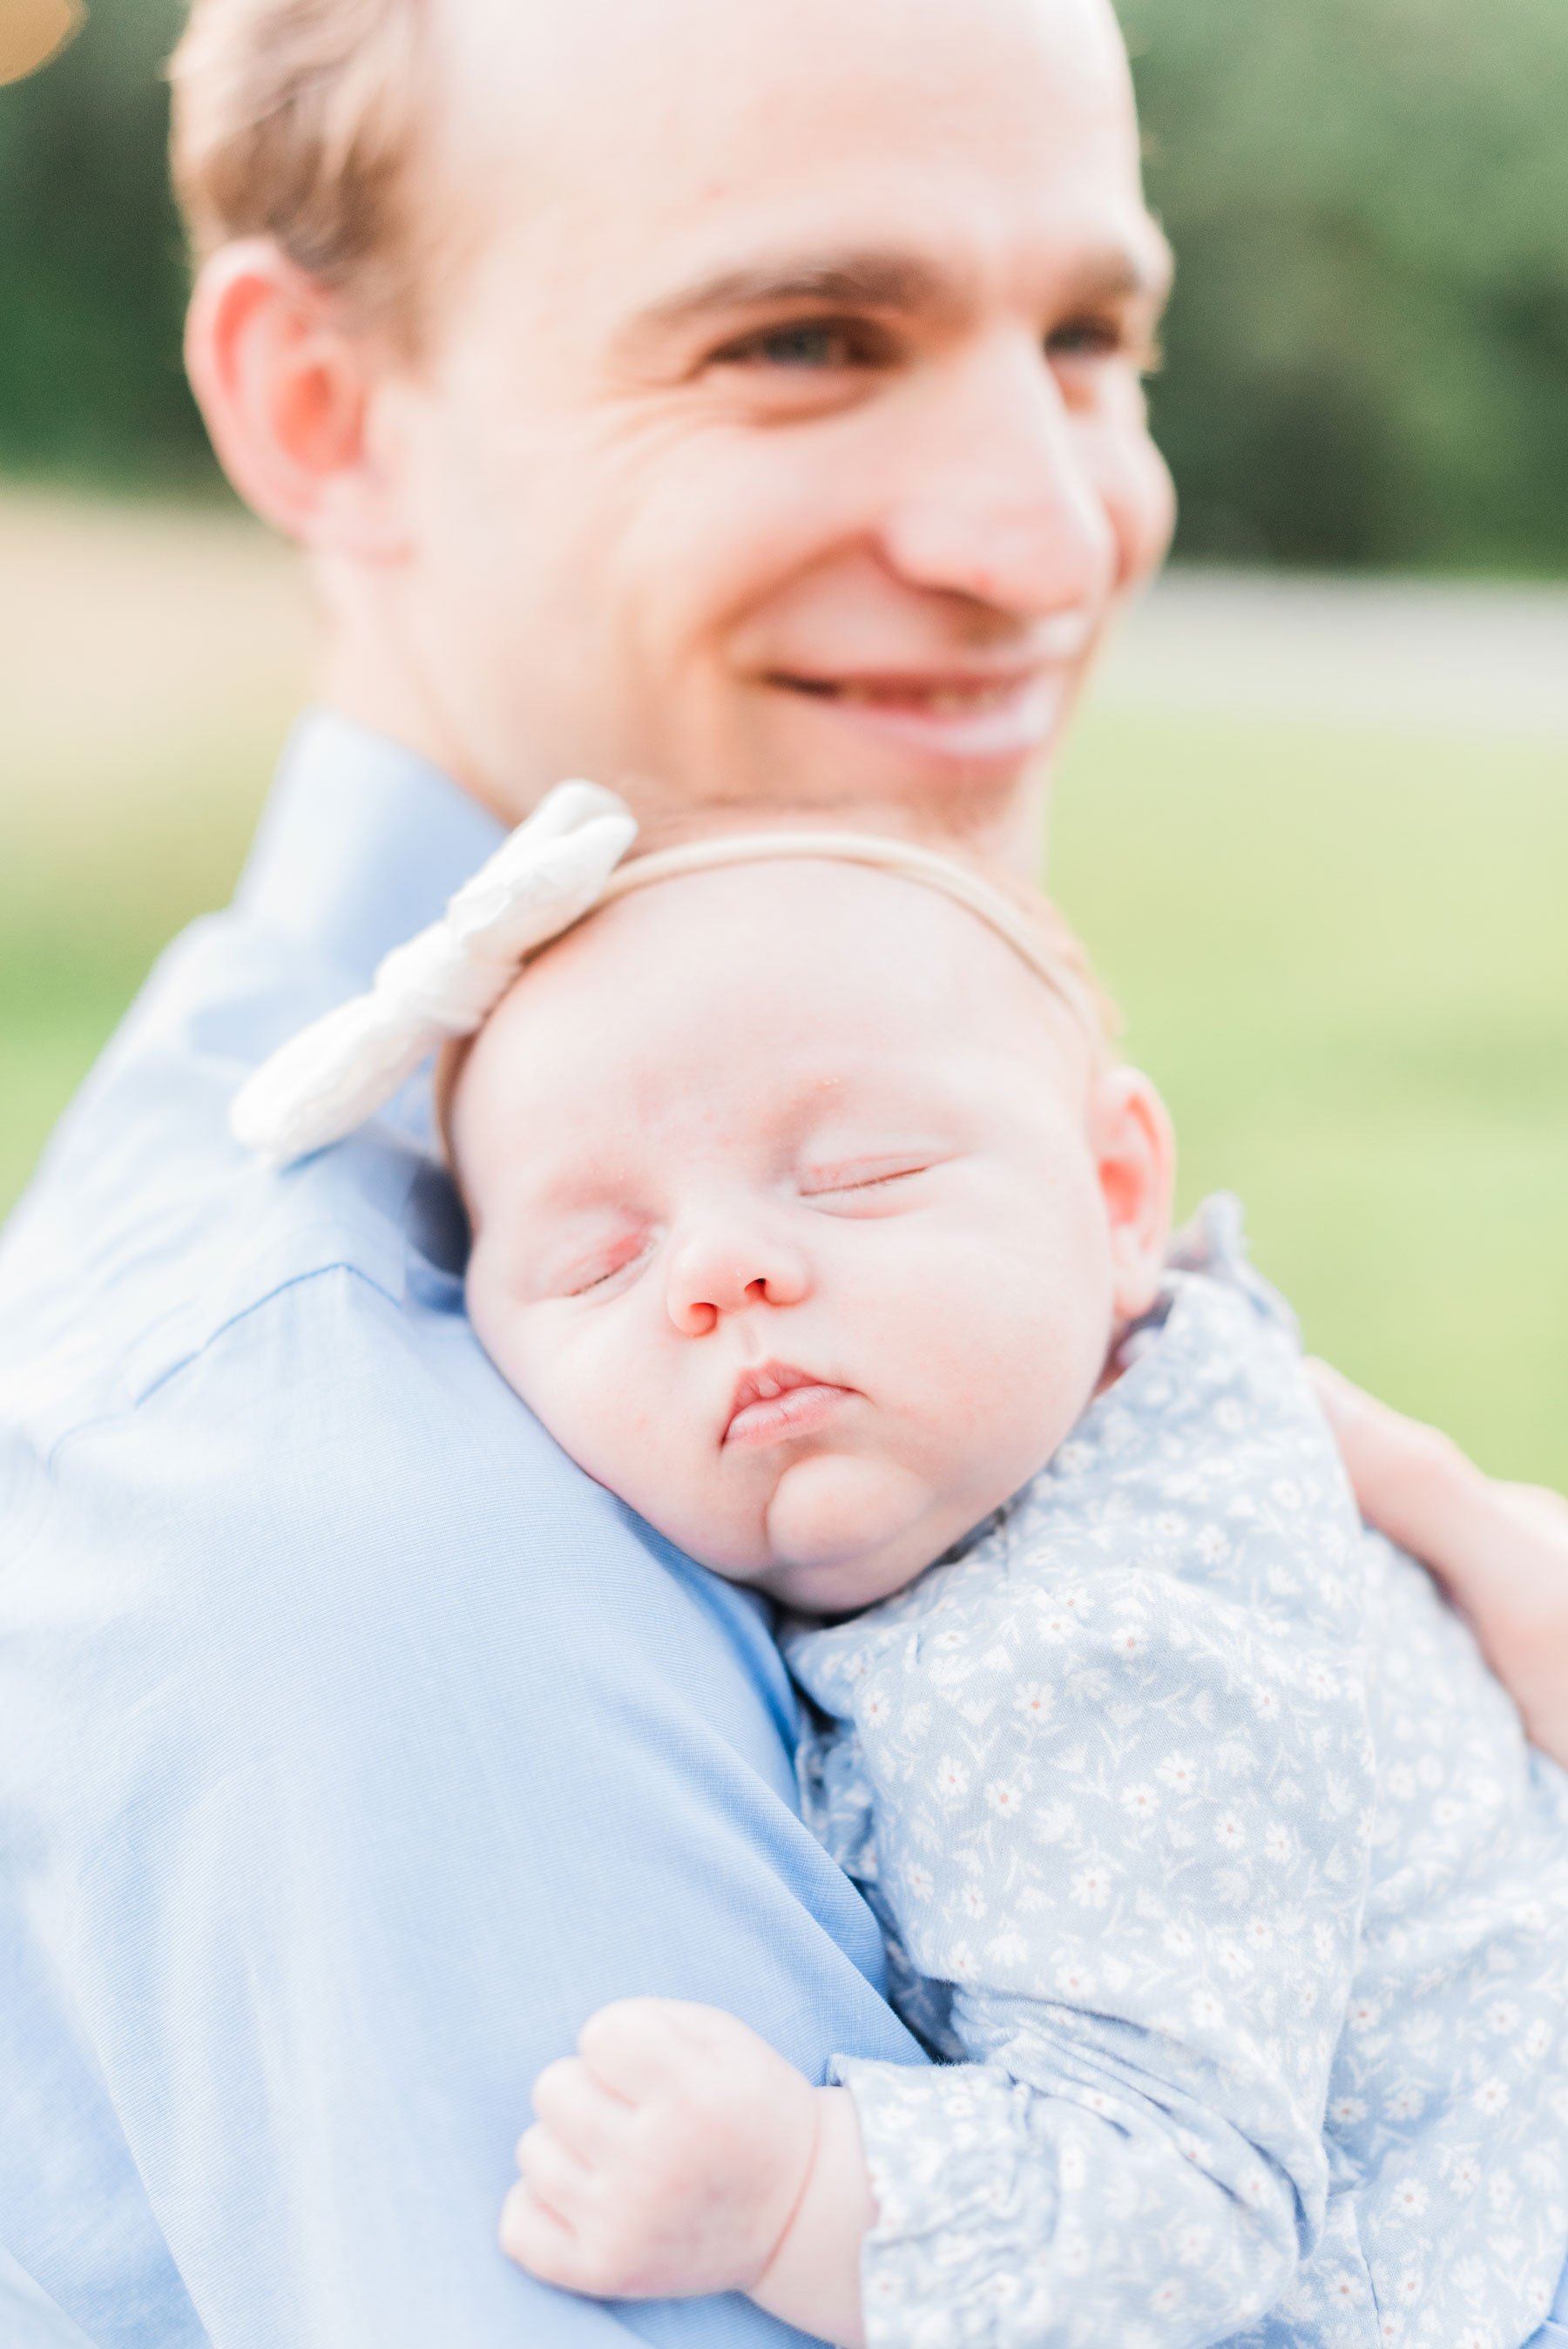    Baby girl sleeps on her dad’s shoulder during their maryland fall family photo session. #marylandfamilyphotographer #findingafamilyphotographer #familyphotooutfits #semiformalphotooutfits #outdoorfamilysession #photoswithkids #georgiafamilyphotos 